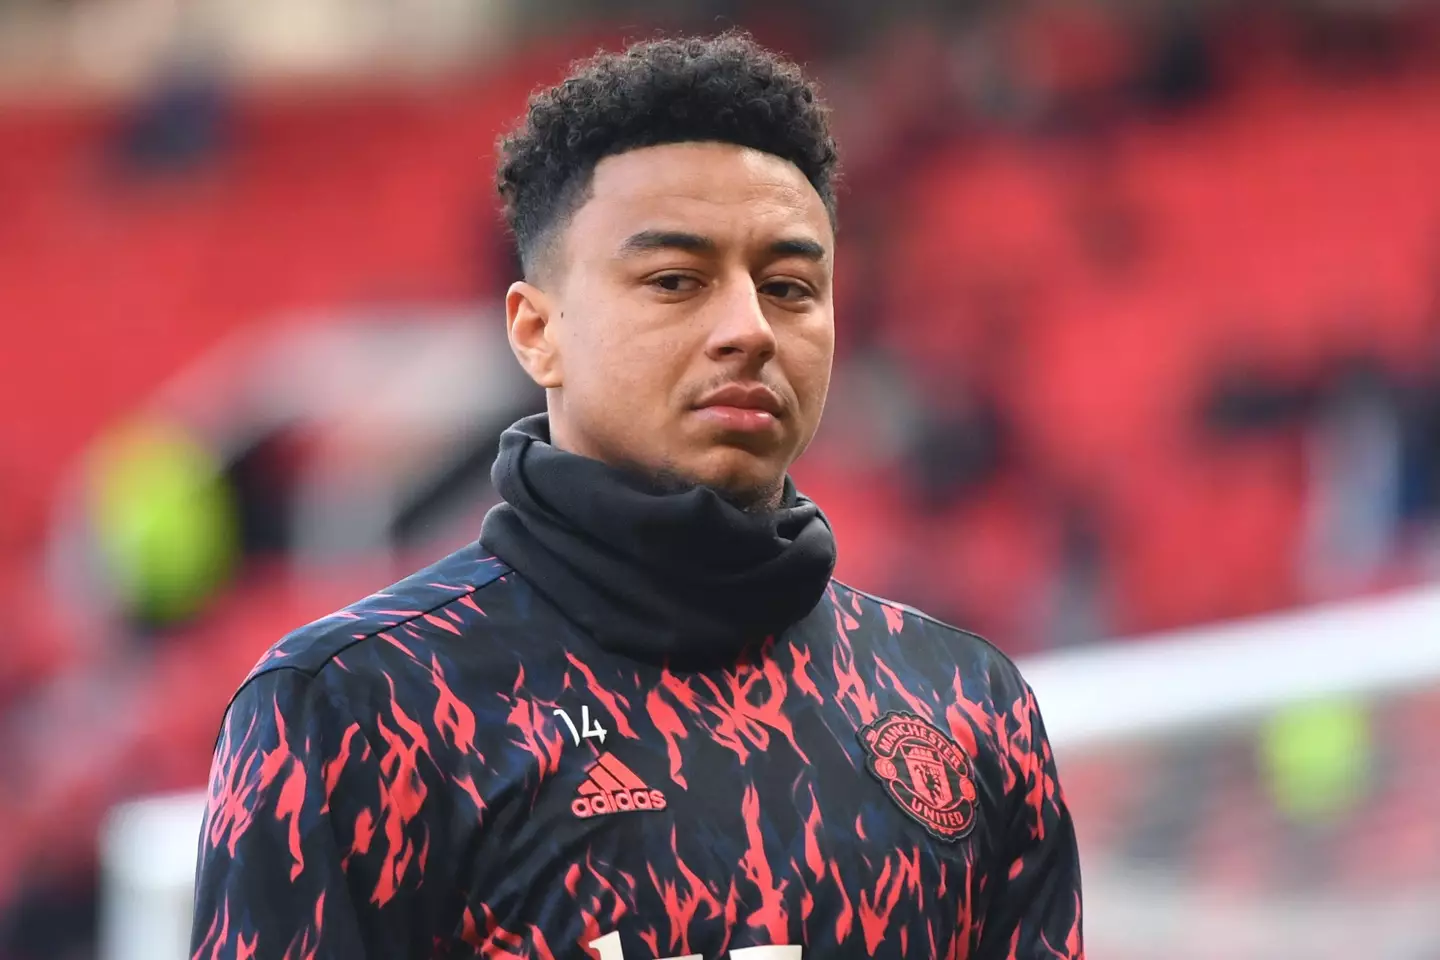 Lingard was an unused sub in Manchester United's final home game of the 2021/22 campaign. Image credit: Alamy